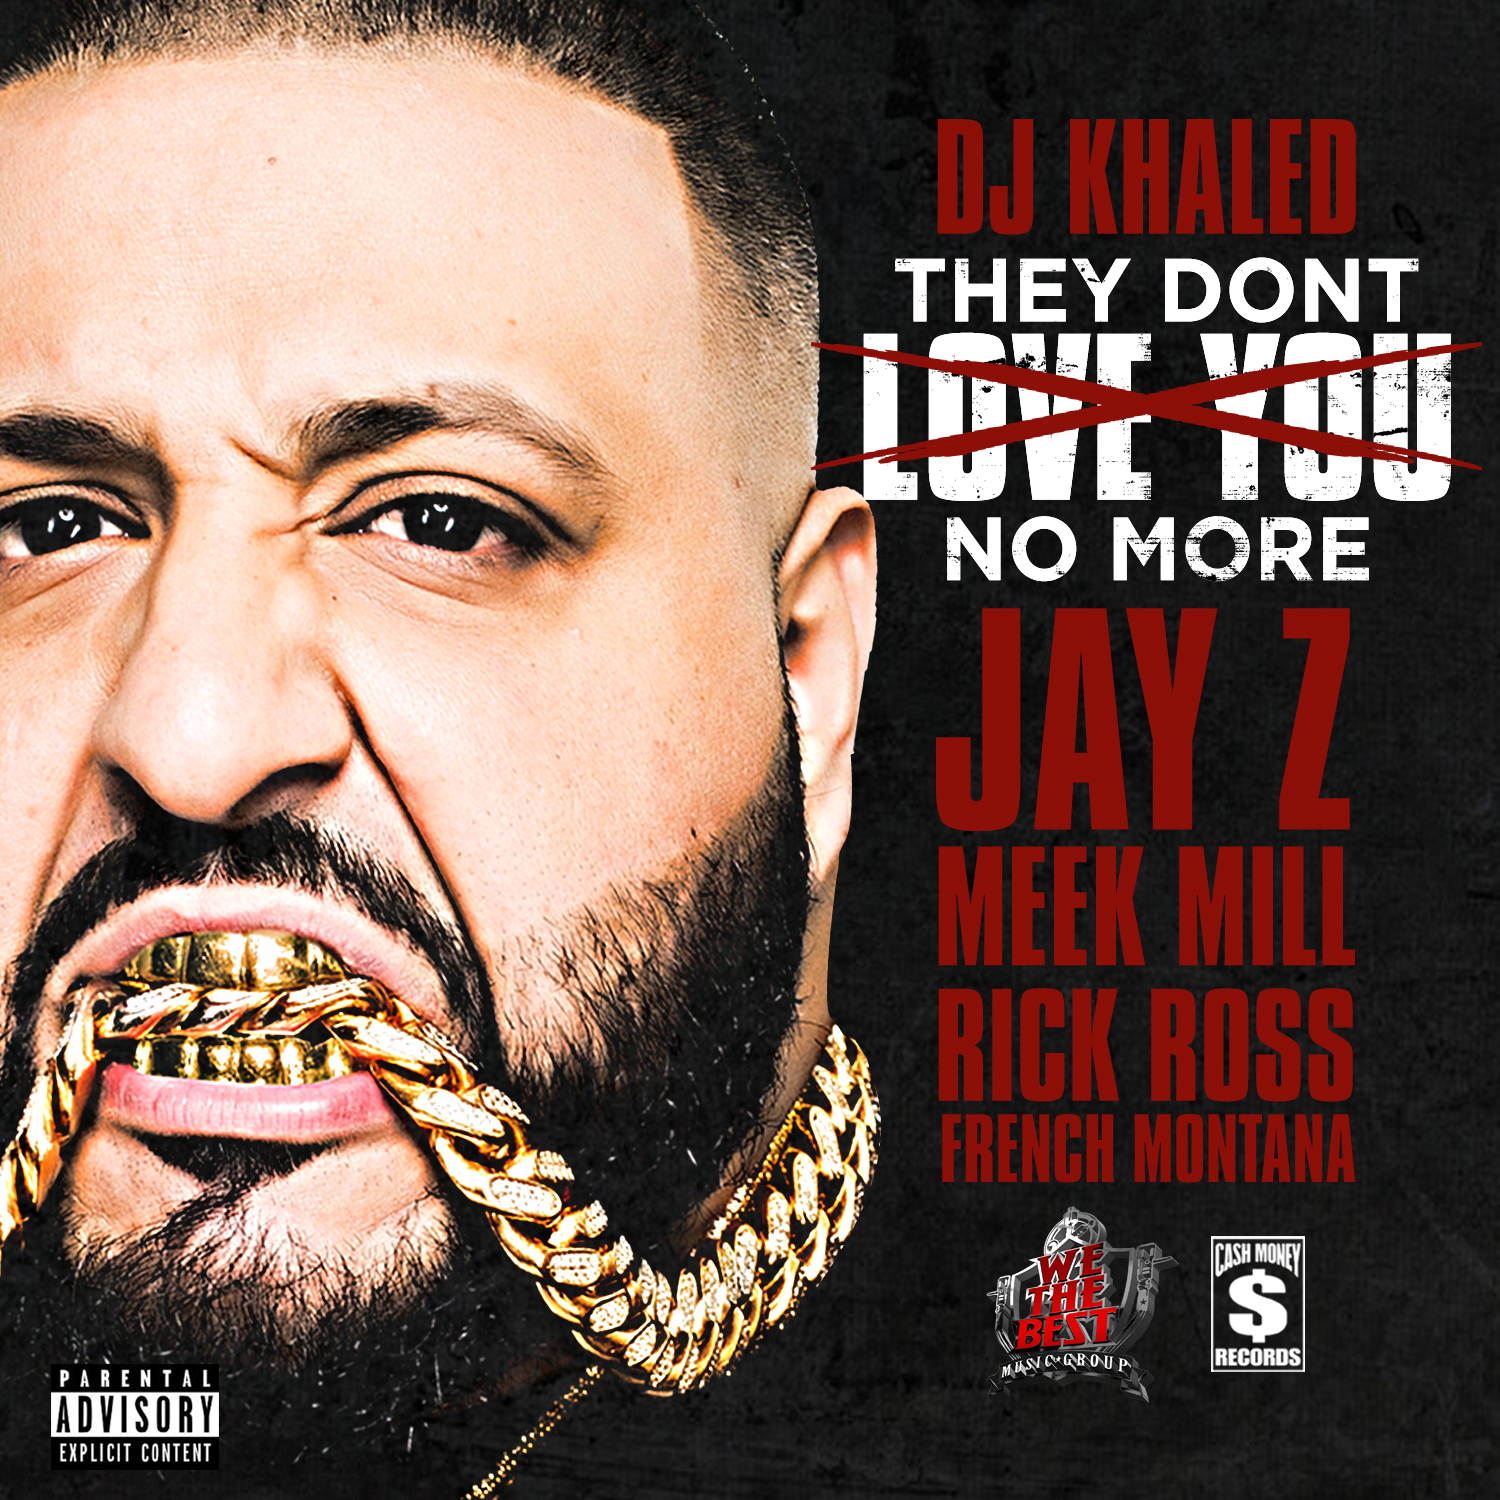 !!HOT!! Dj Khaled Kiss The Ring Free Album Download Zip They-Dont-Love-You-No-More